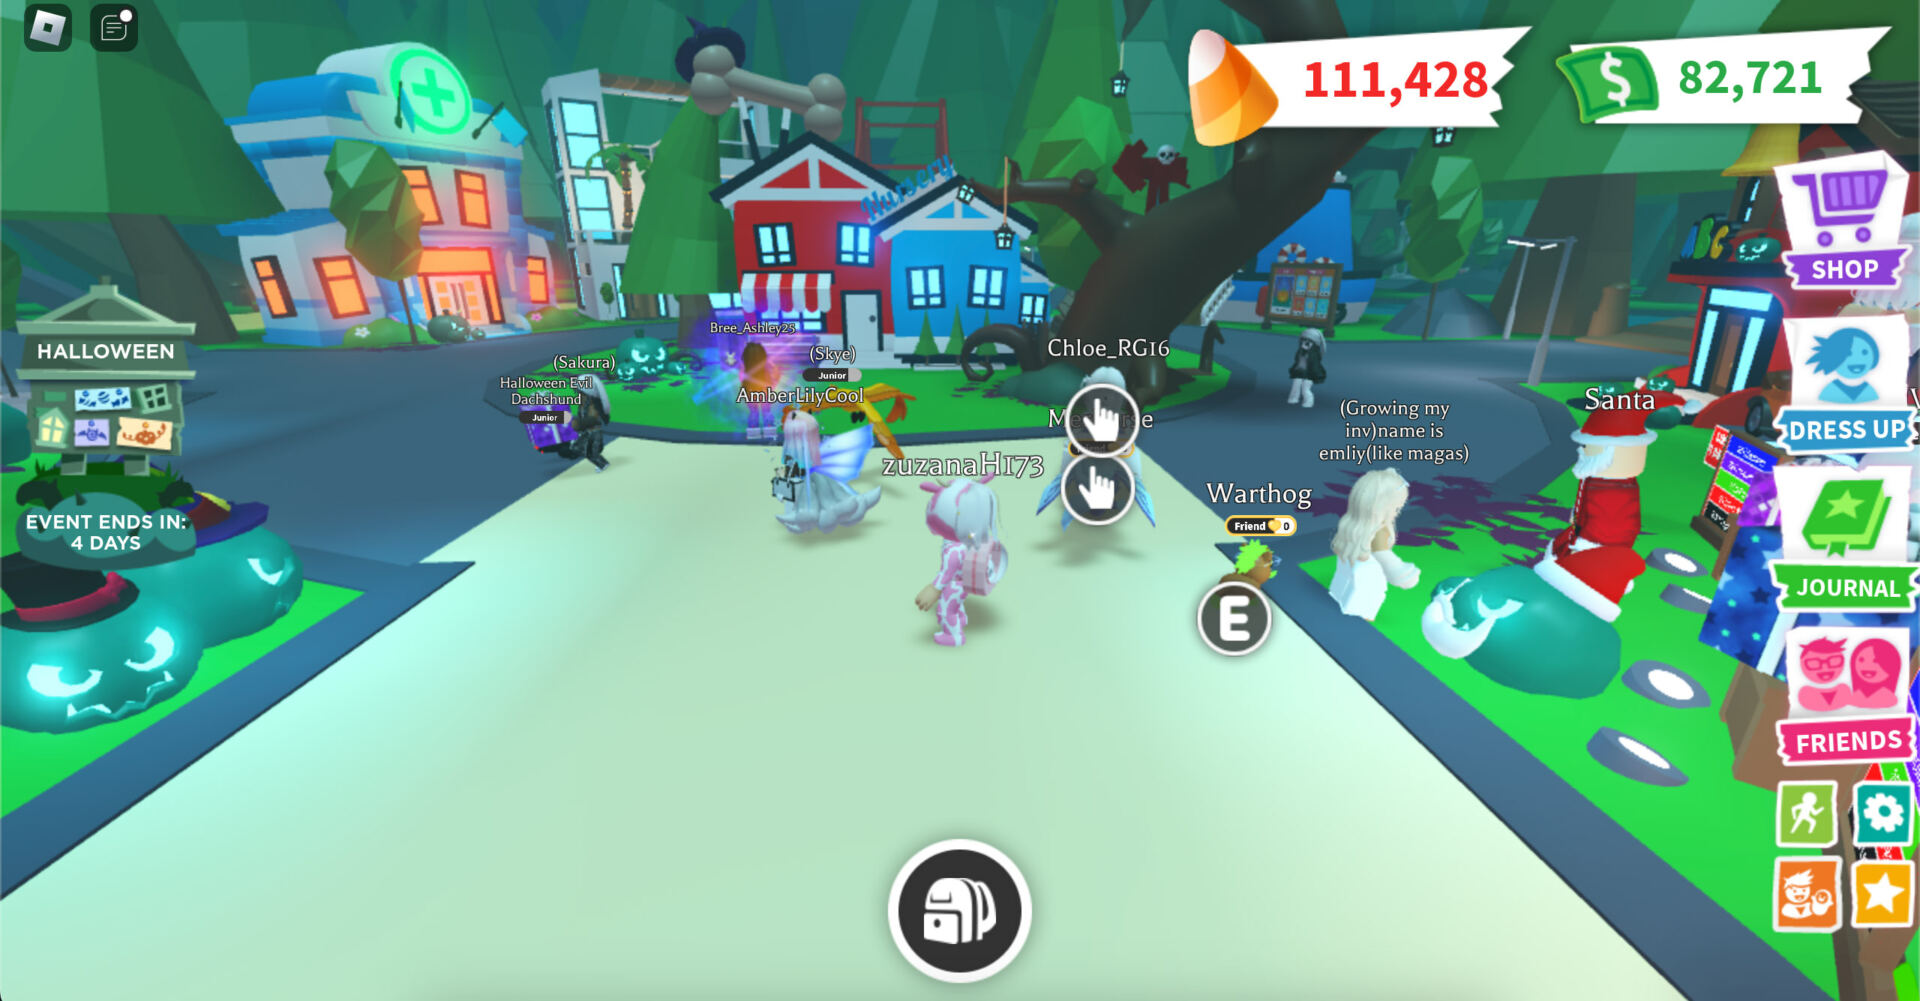 Playing with Friends in Roblox